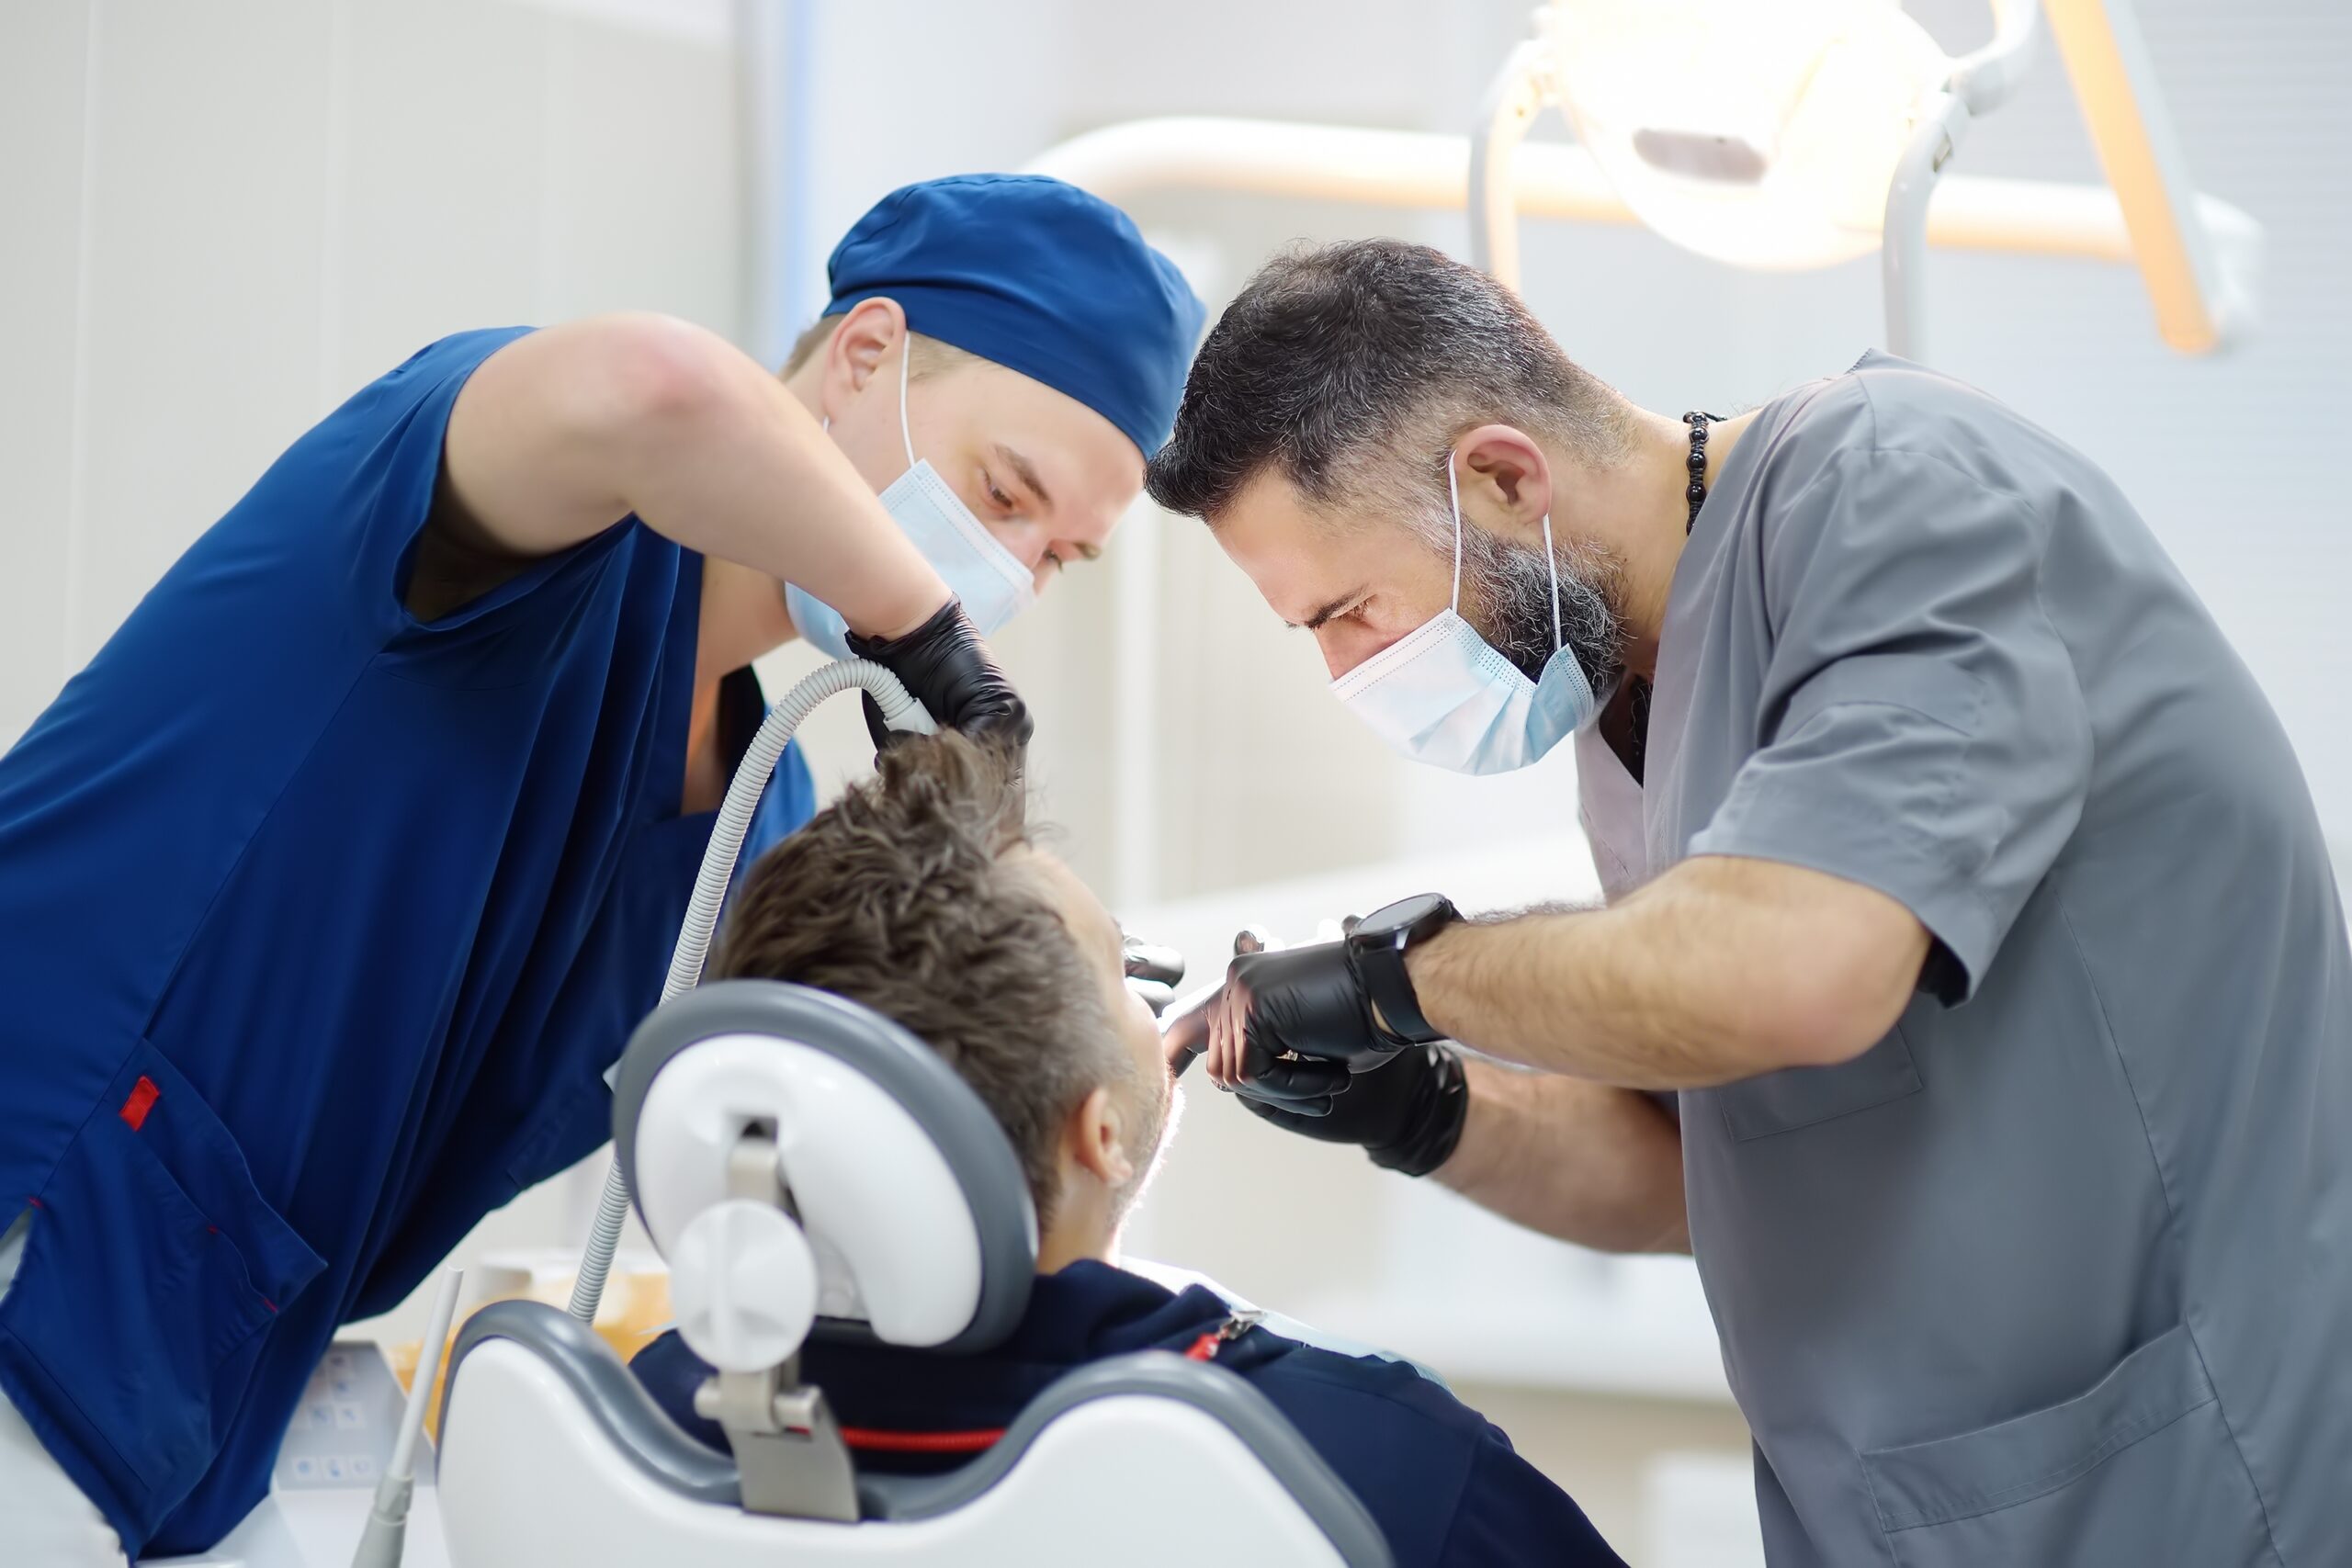 Types Of Sedation Used In Dentistry: Which Is Right For You?